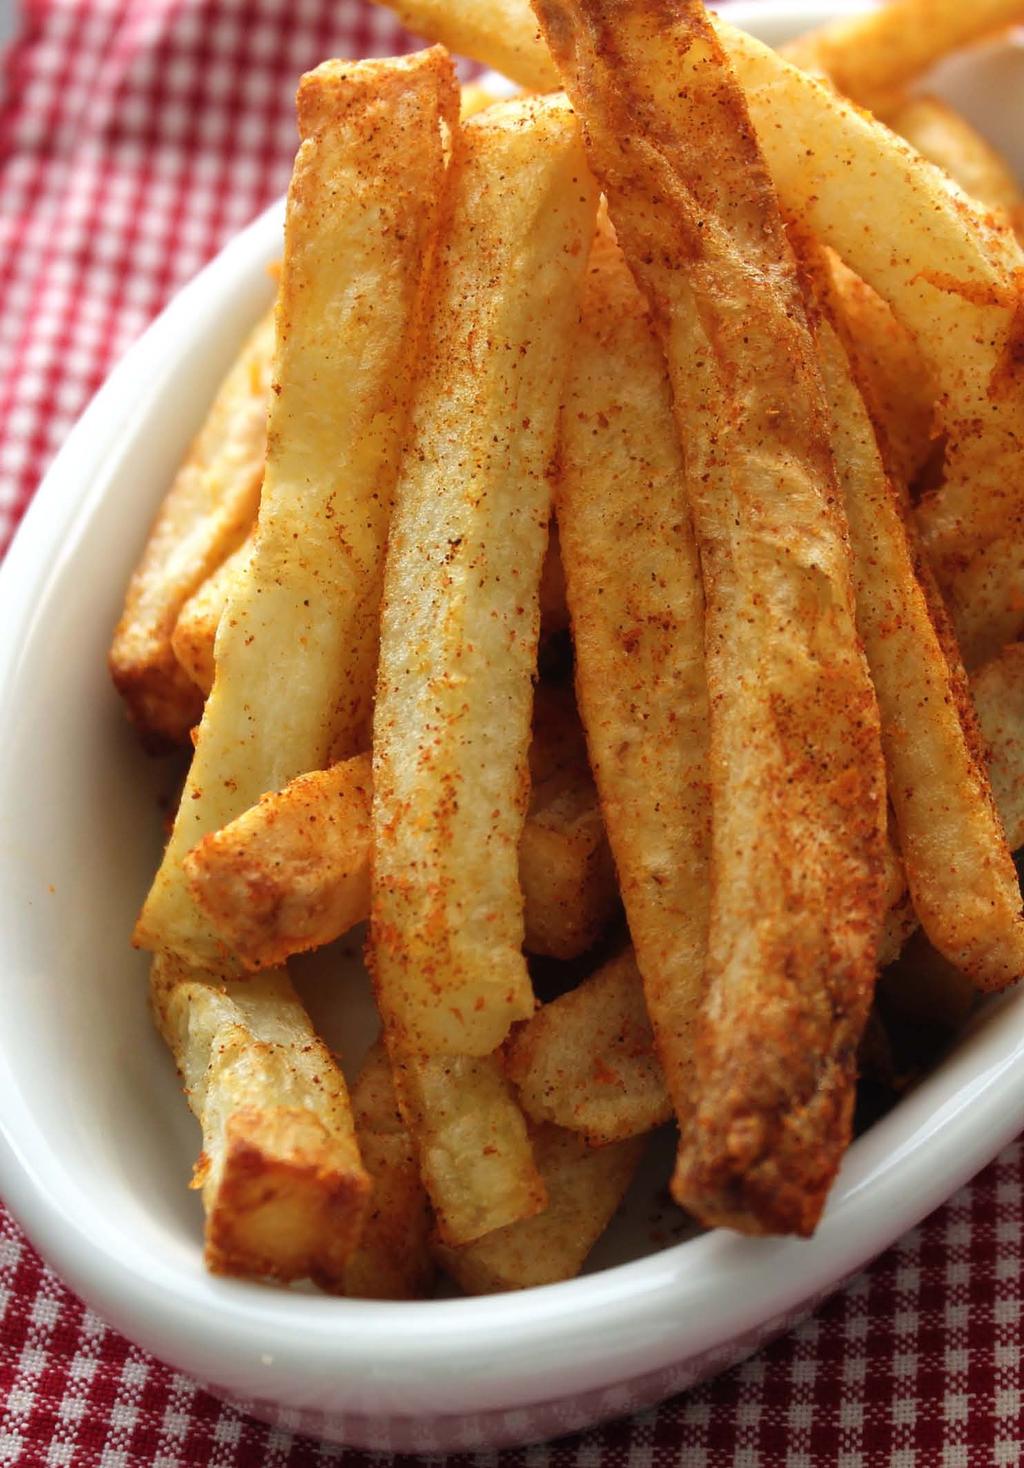 FRENCH FRIES WITH PAPRIKA-PARMESAN SALT Prep time: 35 minutes Total time: 1 hour 5 minutes 2 pounds russet potatoes 2 tablespoons finely grated Parmigiano-Reggiano 1½ teaspoons paprika ¼ teaspoon